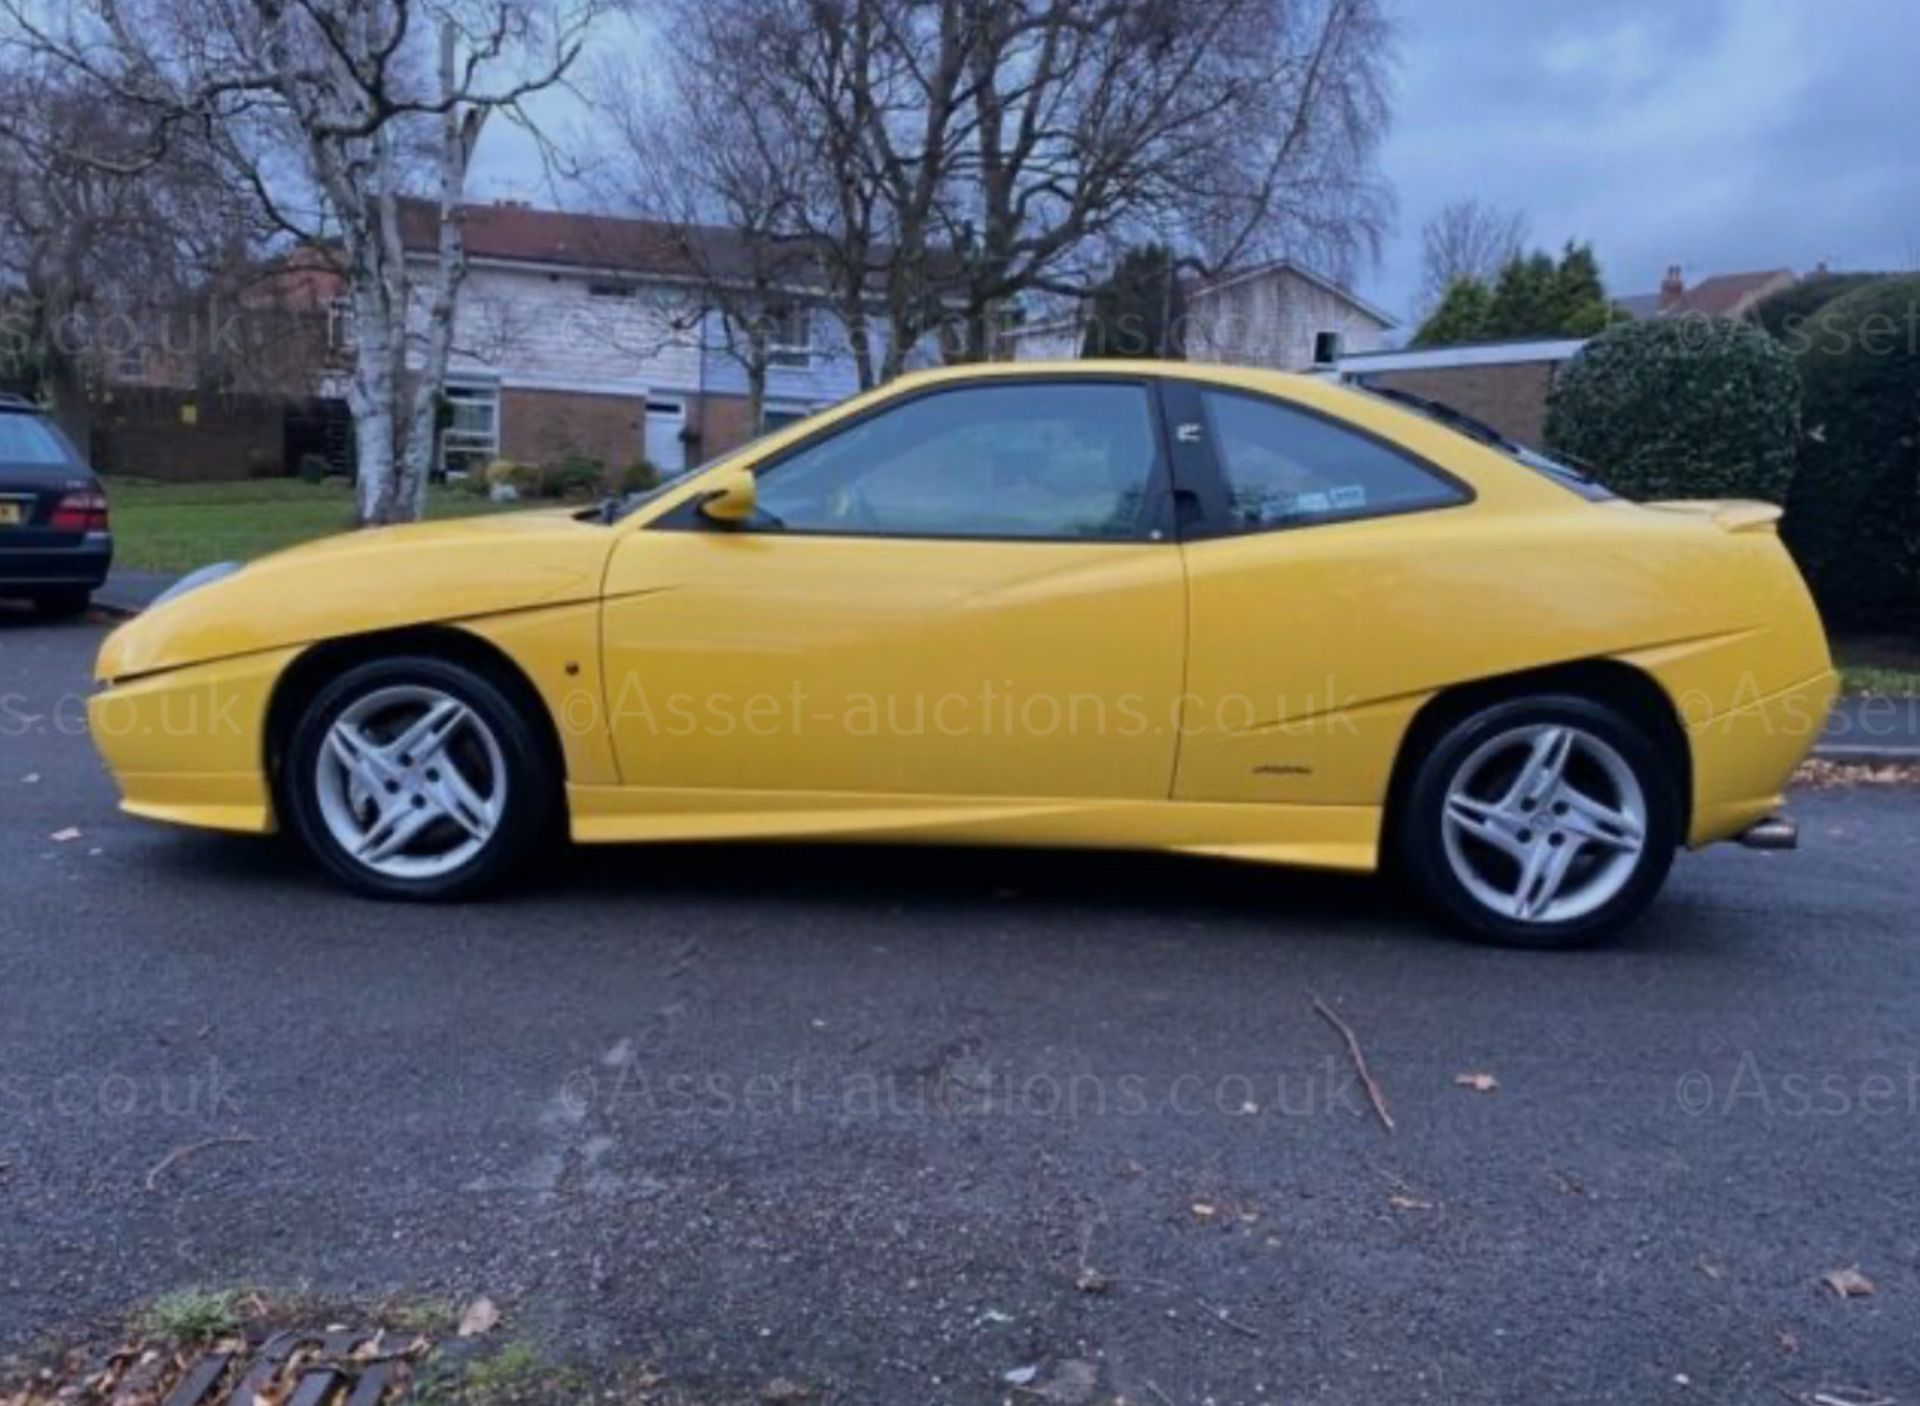 1996 FIAT COUPE 20V TURBO YELLOW SALOON, 2.0 PETROL ENGINE, SHOWING 95K MILES *NO VAT*